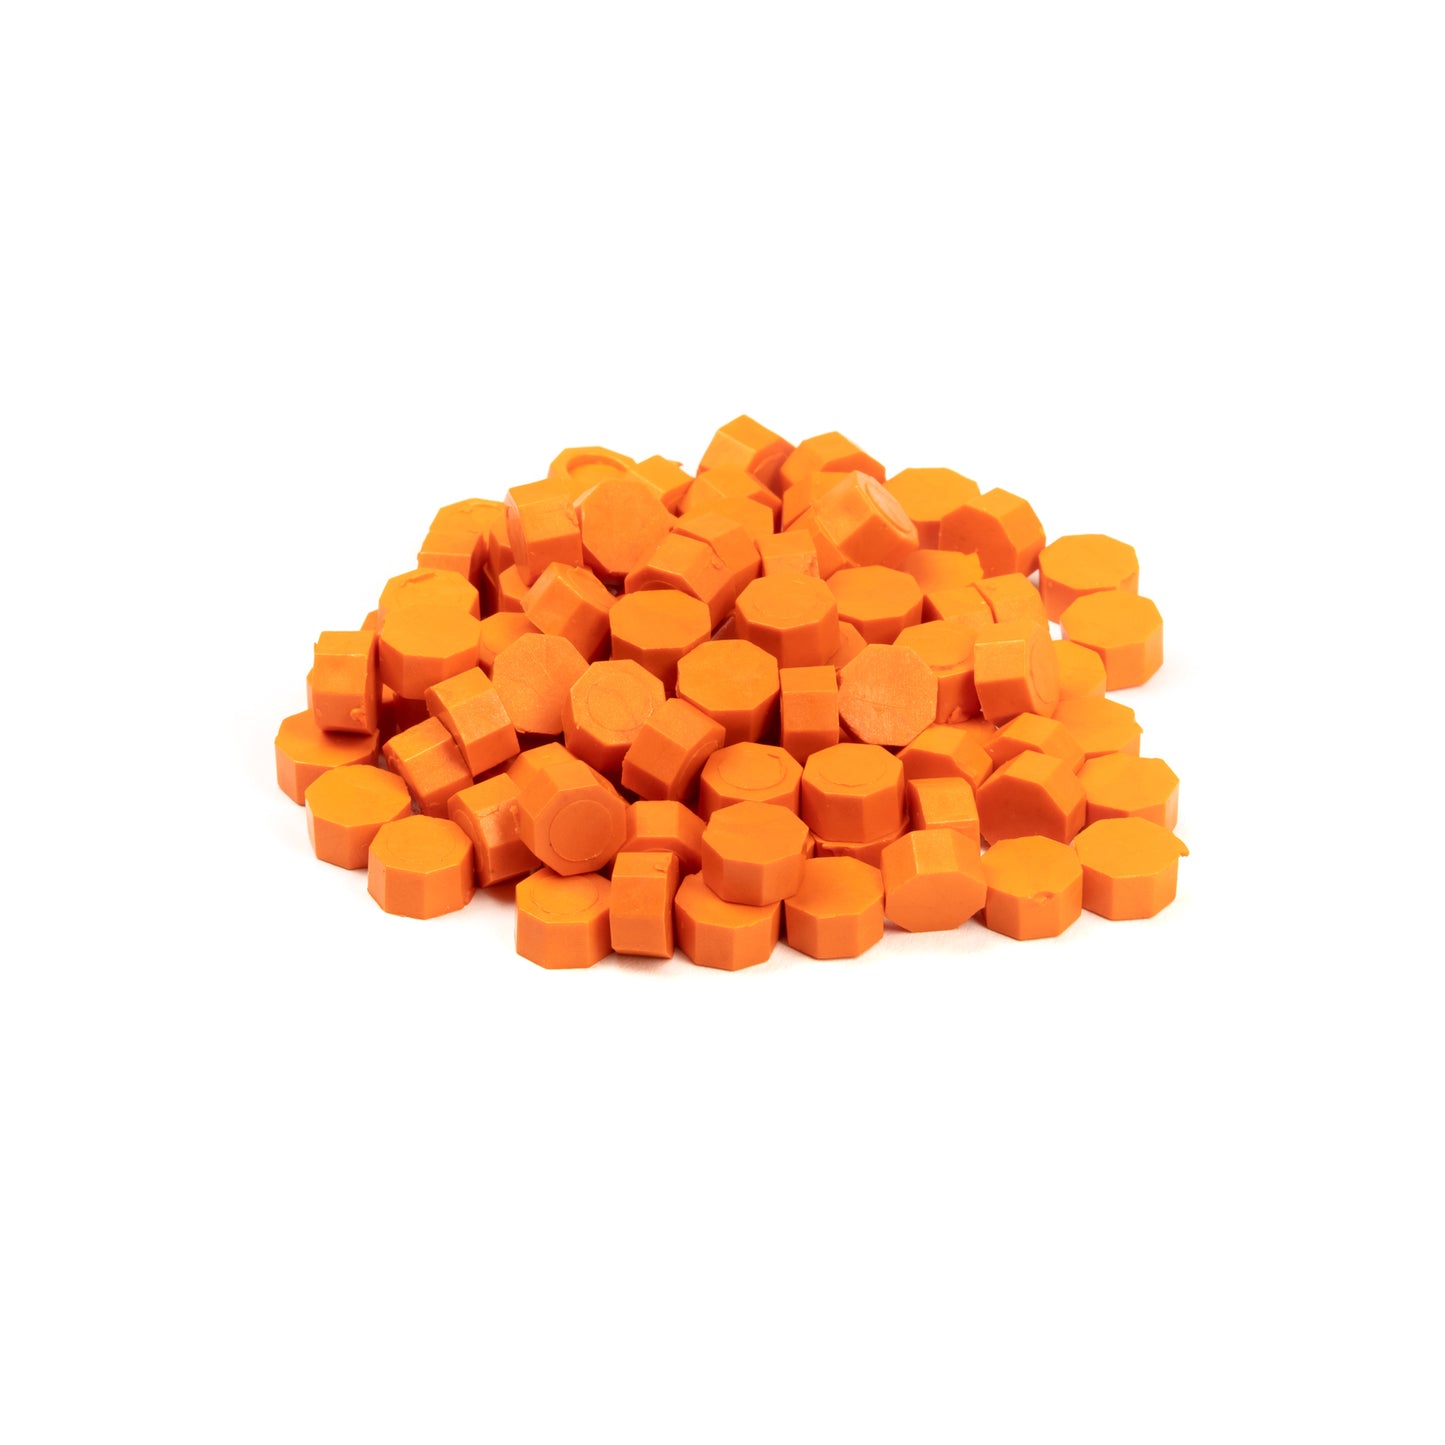 Clementine Wax Beads (Discontinued, Imperfect)